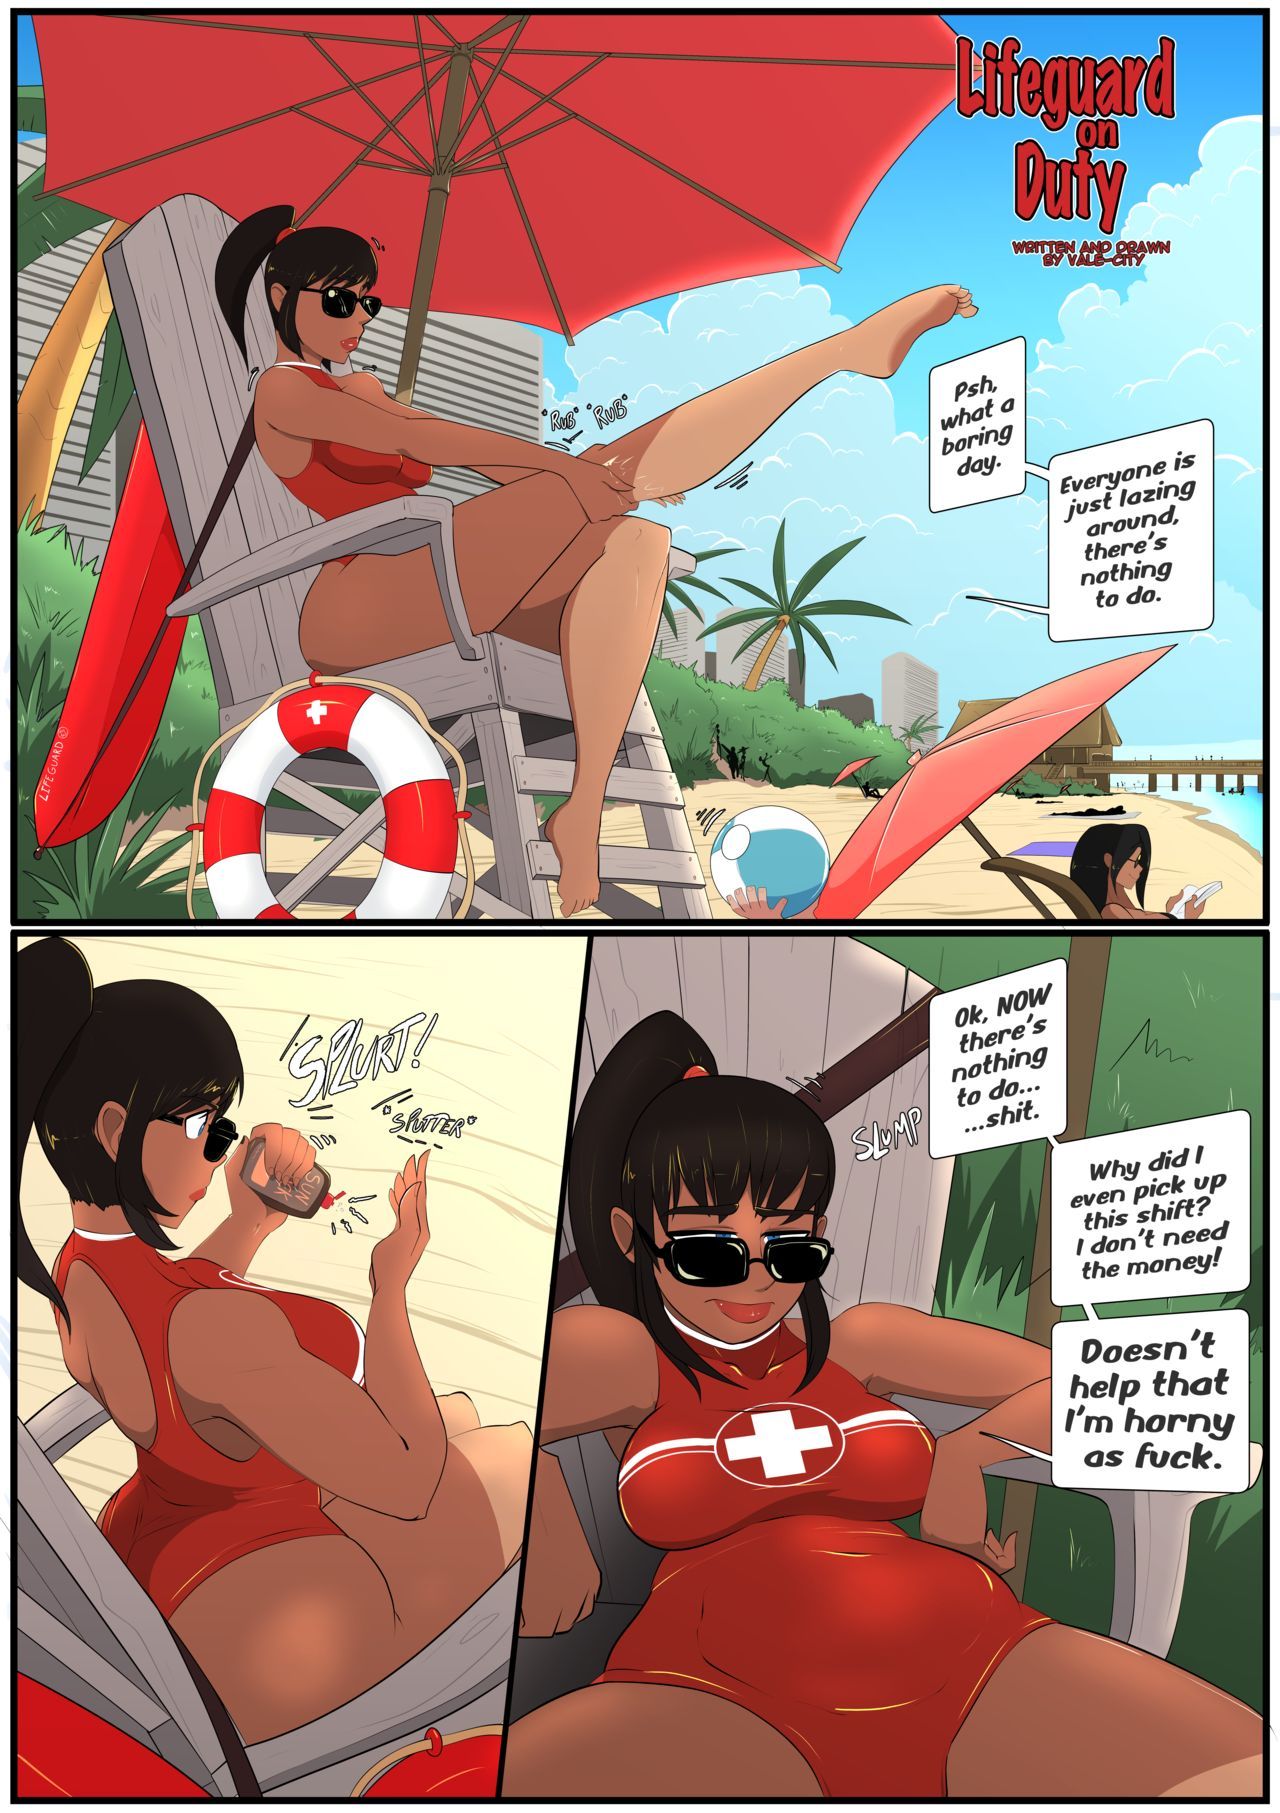 [vale-city] Lifeguard on Duty (ongoing) 勤務中のリフガード 3